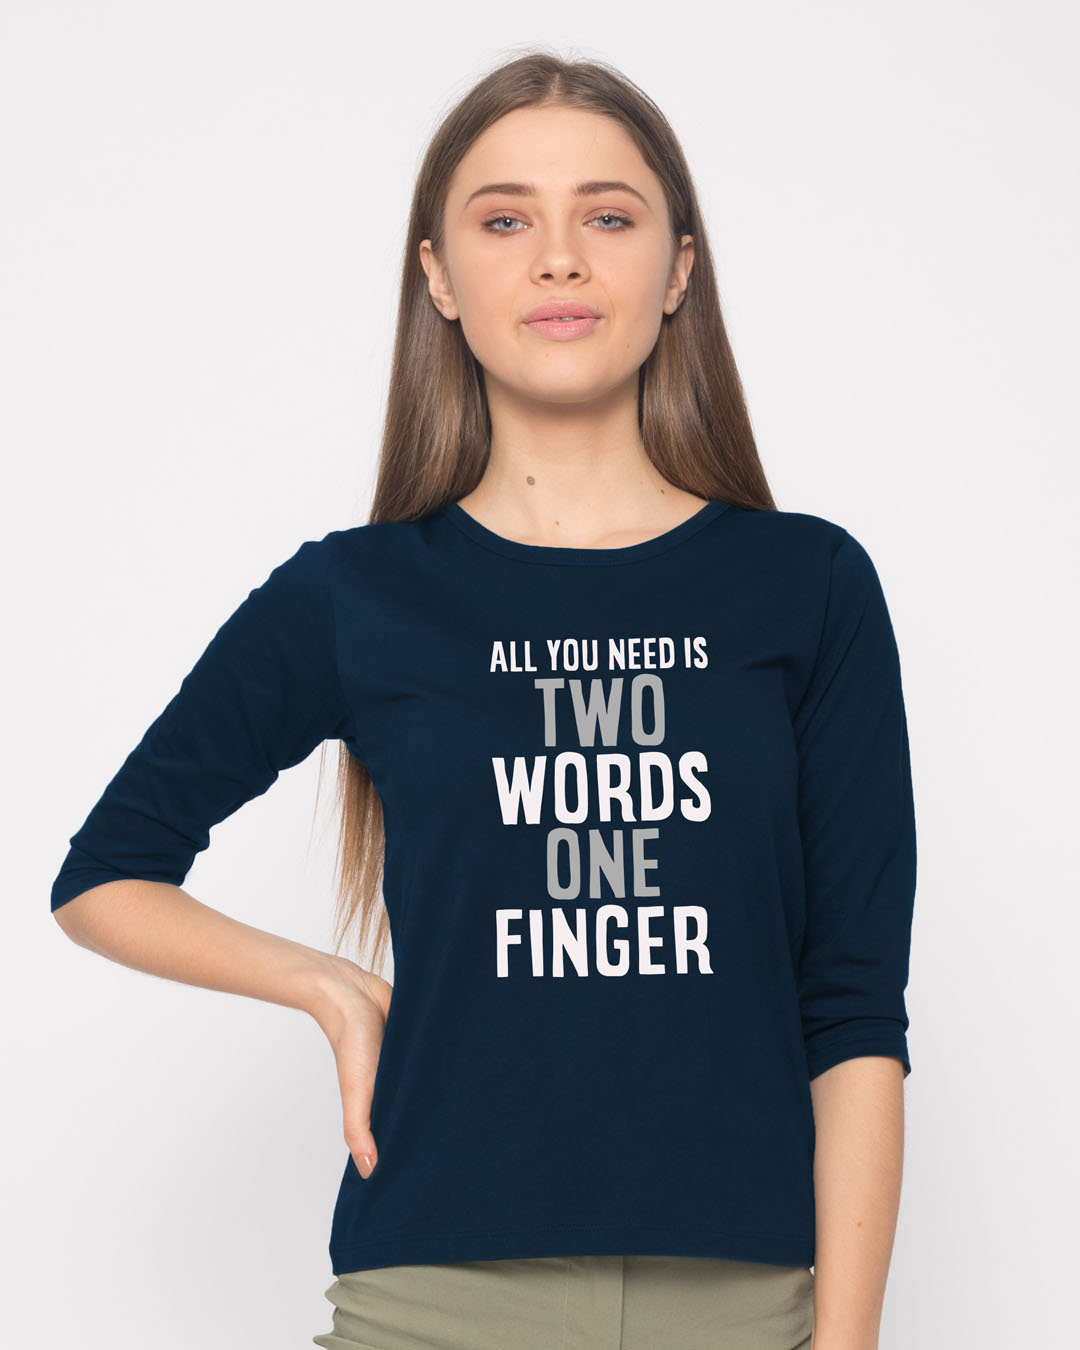 Buy One Finger Round Neck 34th Sleeve T Shirt For Women Blue Online At Bewakoof 0730